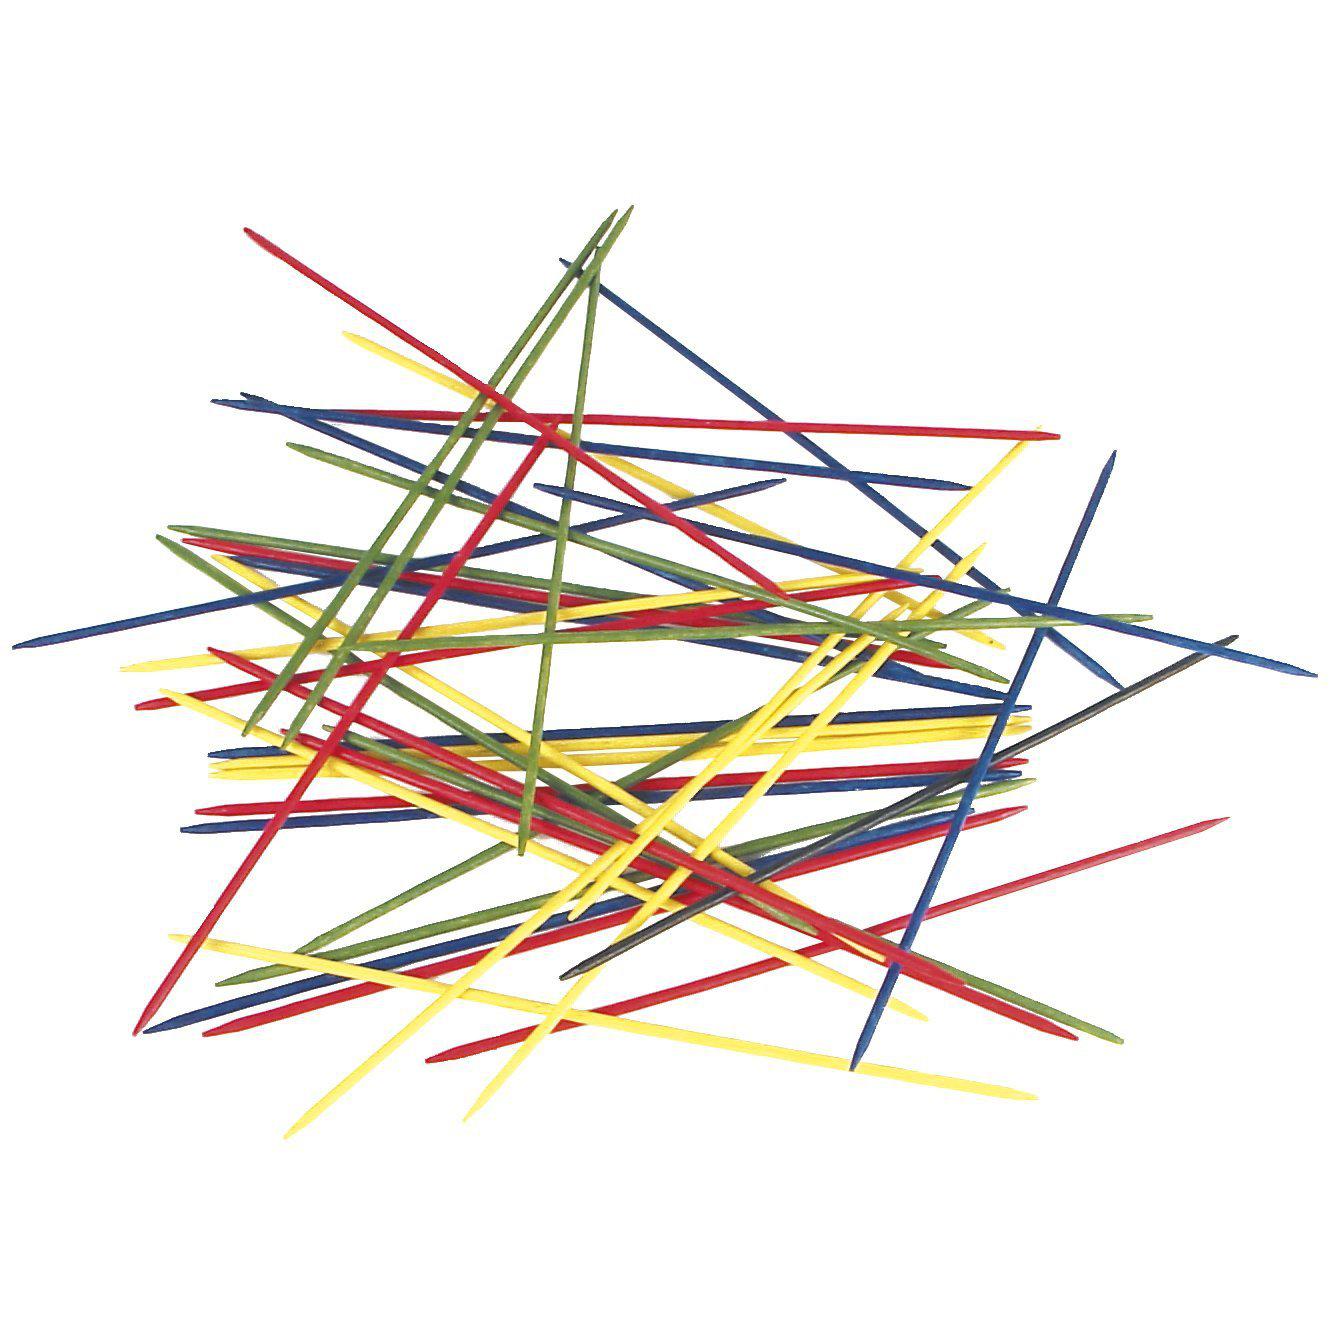 Pick-Up Sticks - Yellow Springs Toy Company